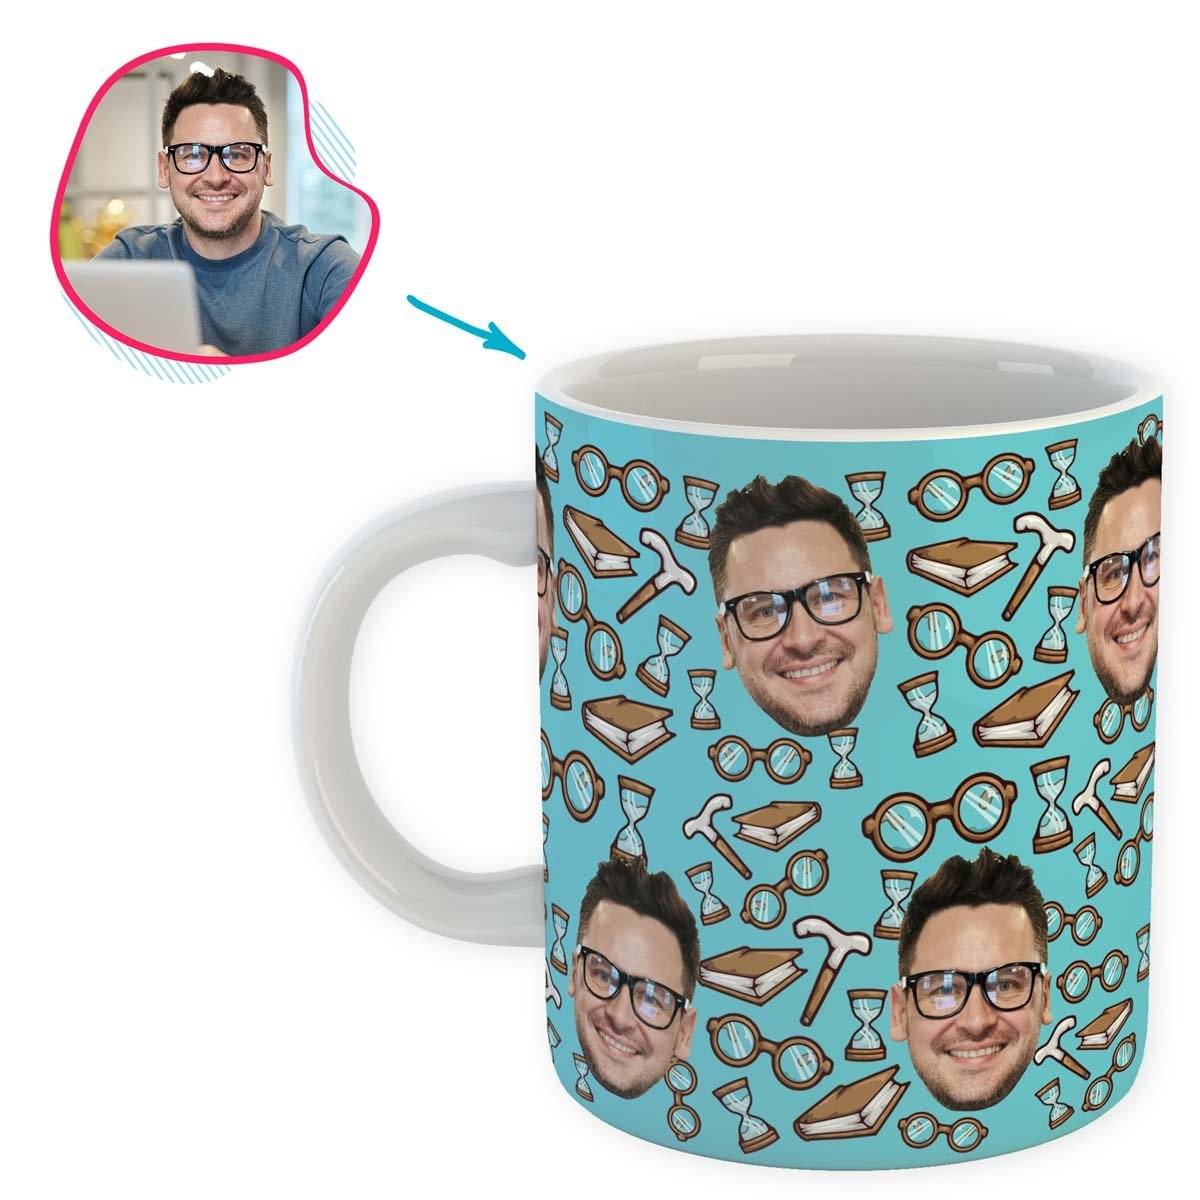 Blue Retirement personalized mug with photo of face printed on it